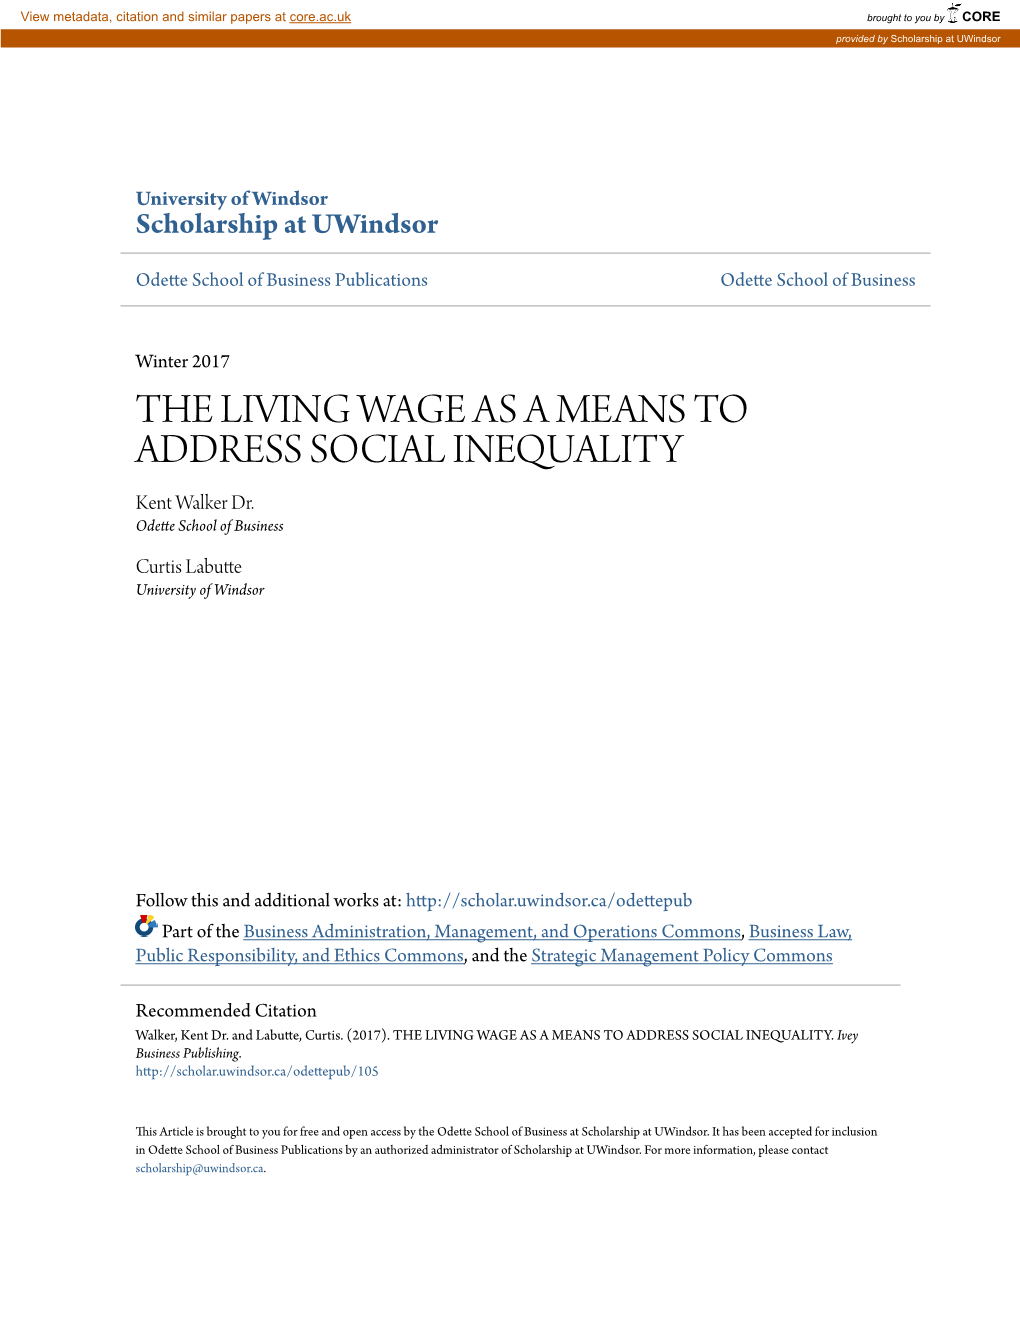 THE LIVING WAGE AS a MEANS to ADDRESS SOCIAL INEQUALITY Kent Walker Dr